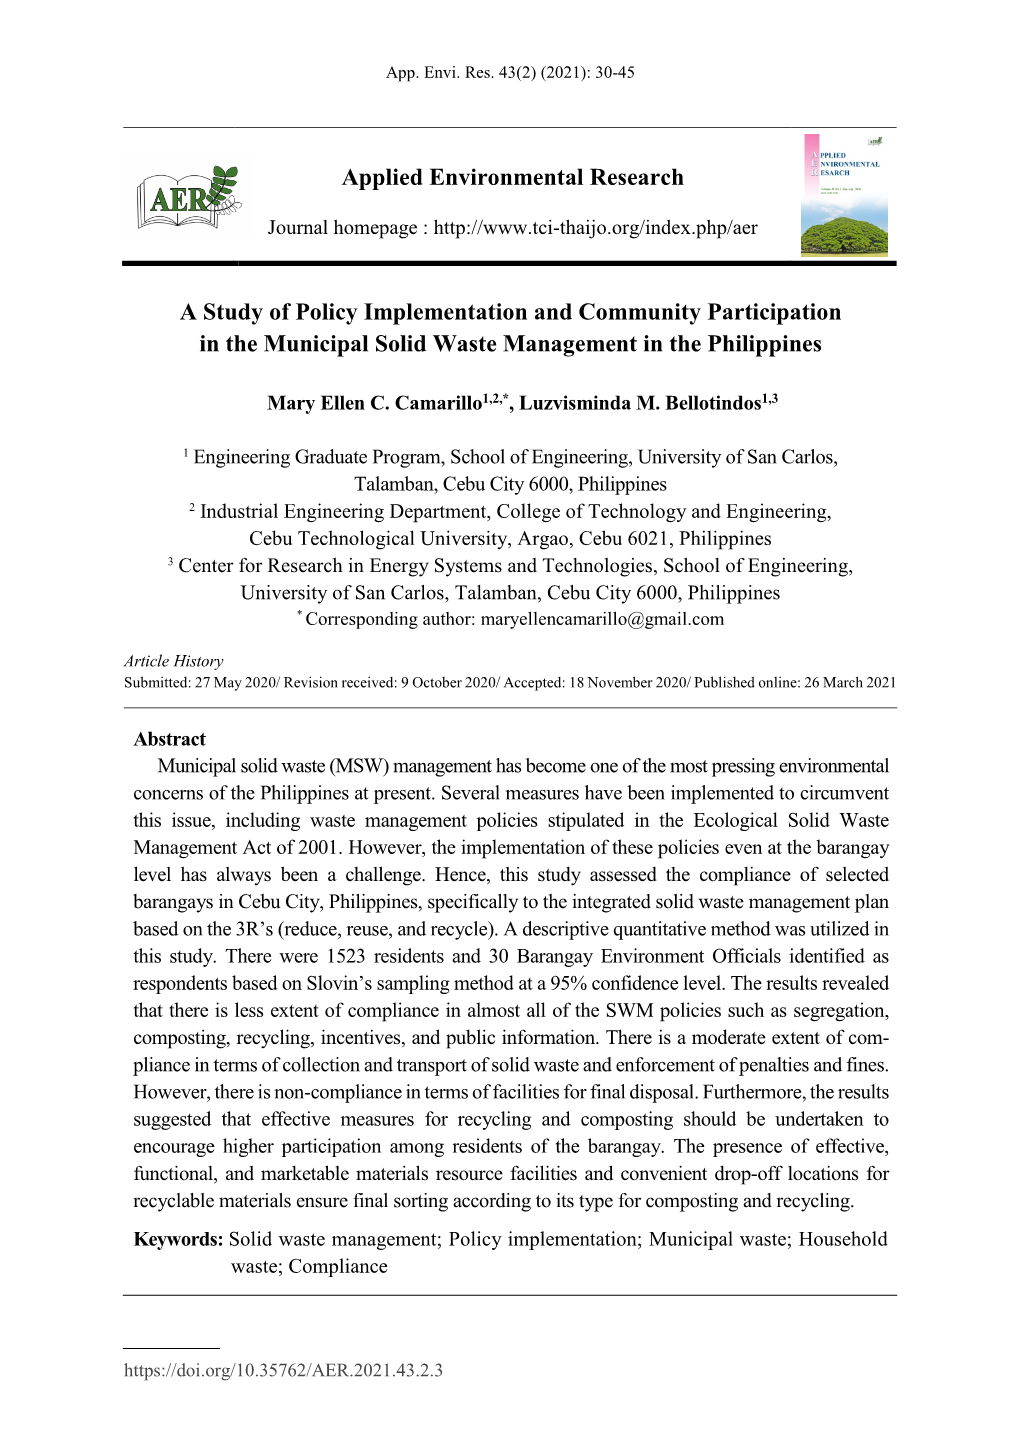 A Study of Policy Implementation and Community Participation in the Municipal Solid Waste Management in the Philippines